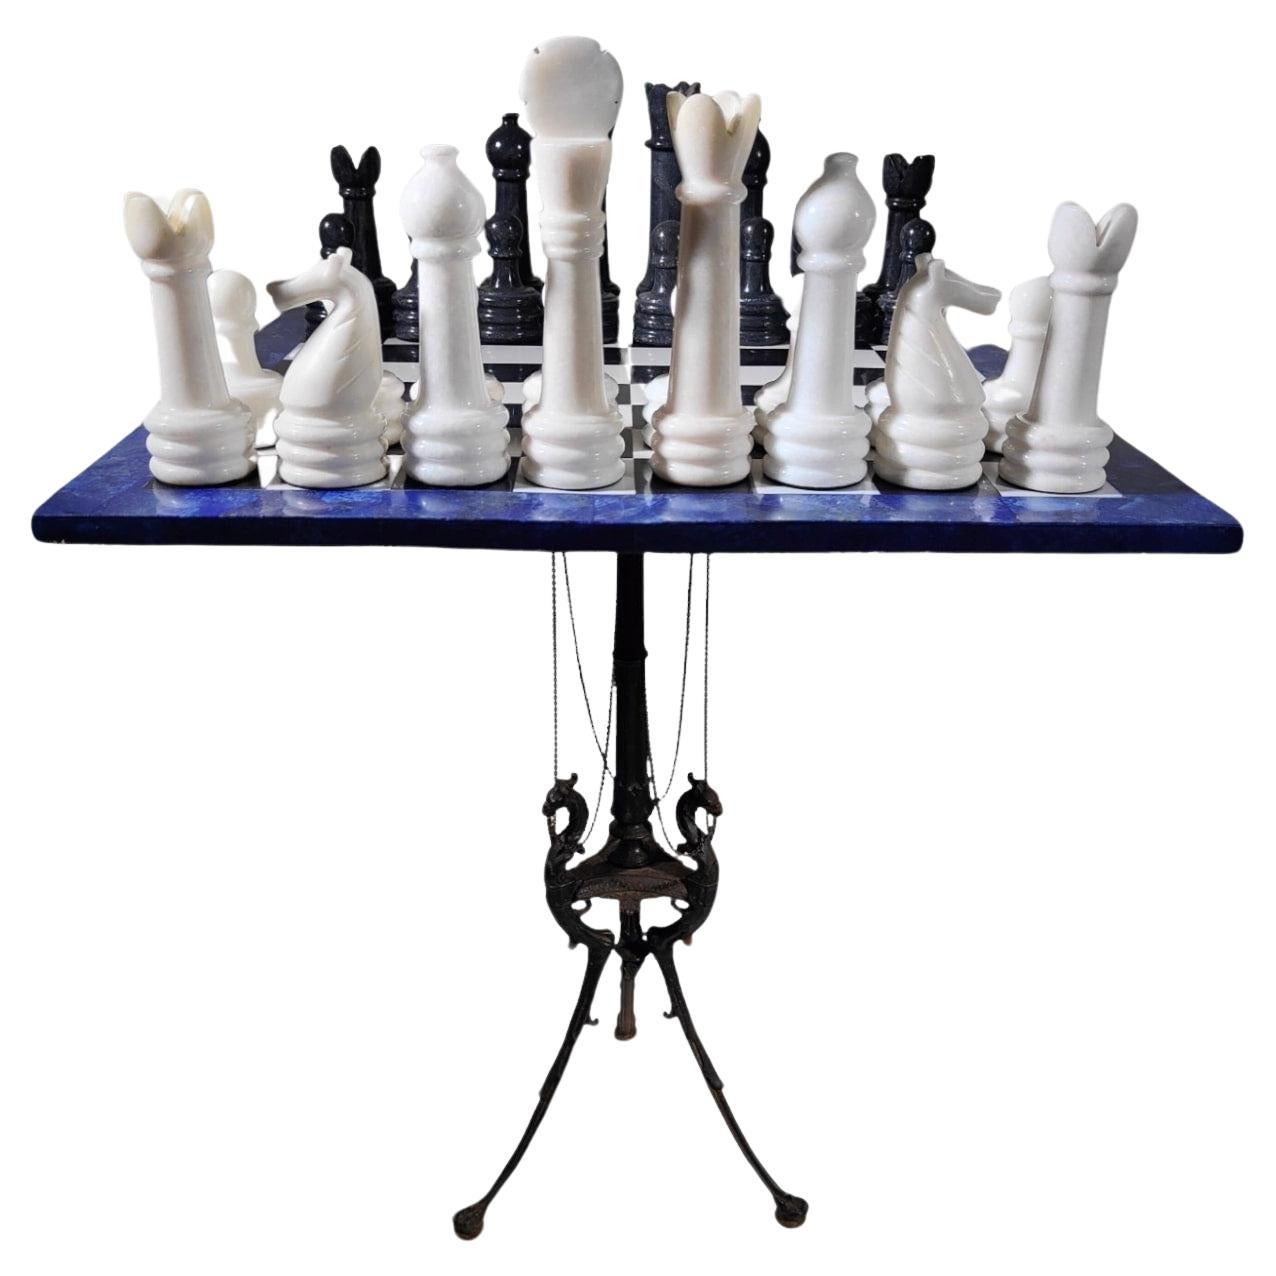 Italian Chess Table from the 1950s - Lapis Lazuli, Marble, and Dragon-Shaped 